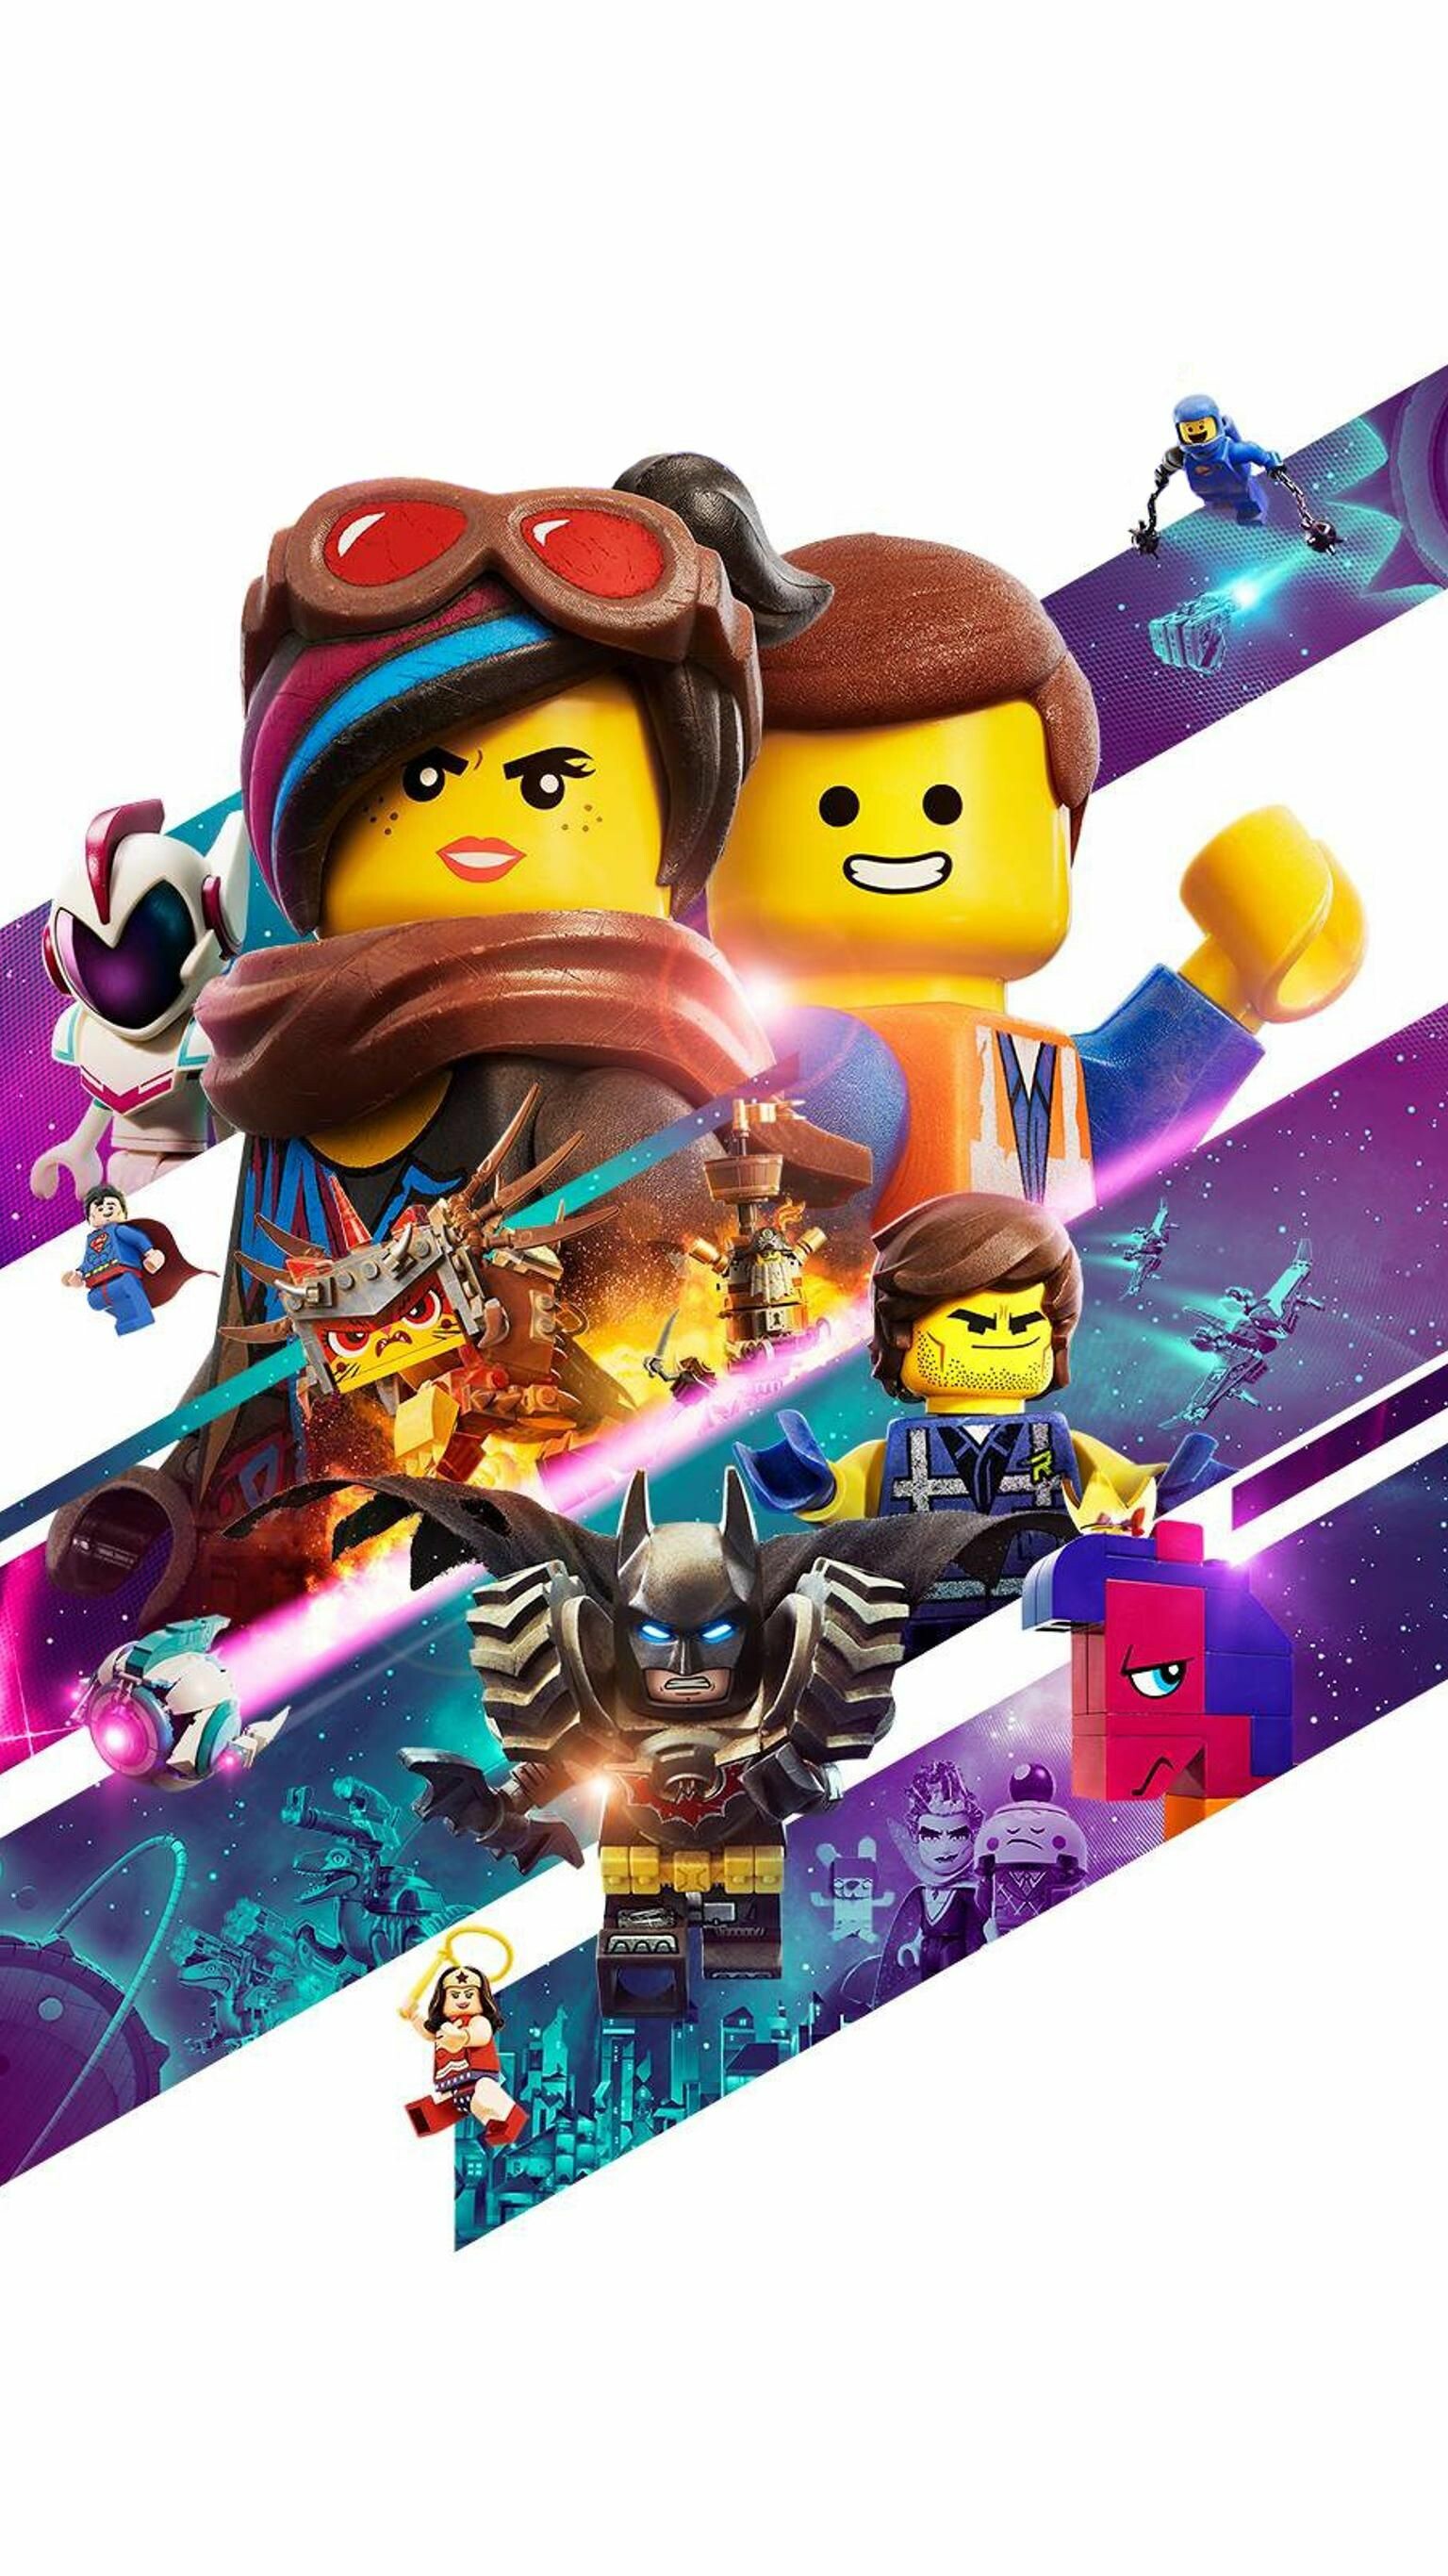 The Lego Movie: Emmet, Lucy, known as Wyldstyle, Figures. 1540x2740 HD Wallpaper.